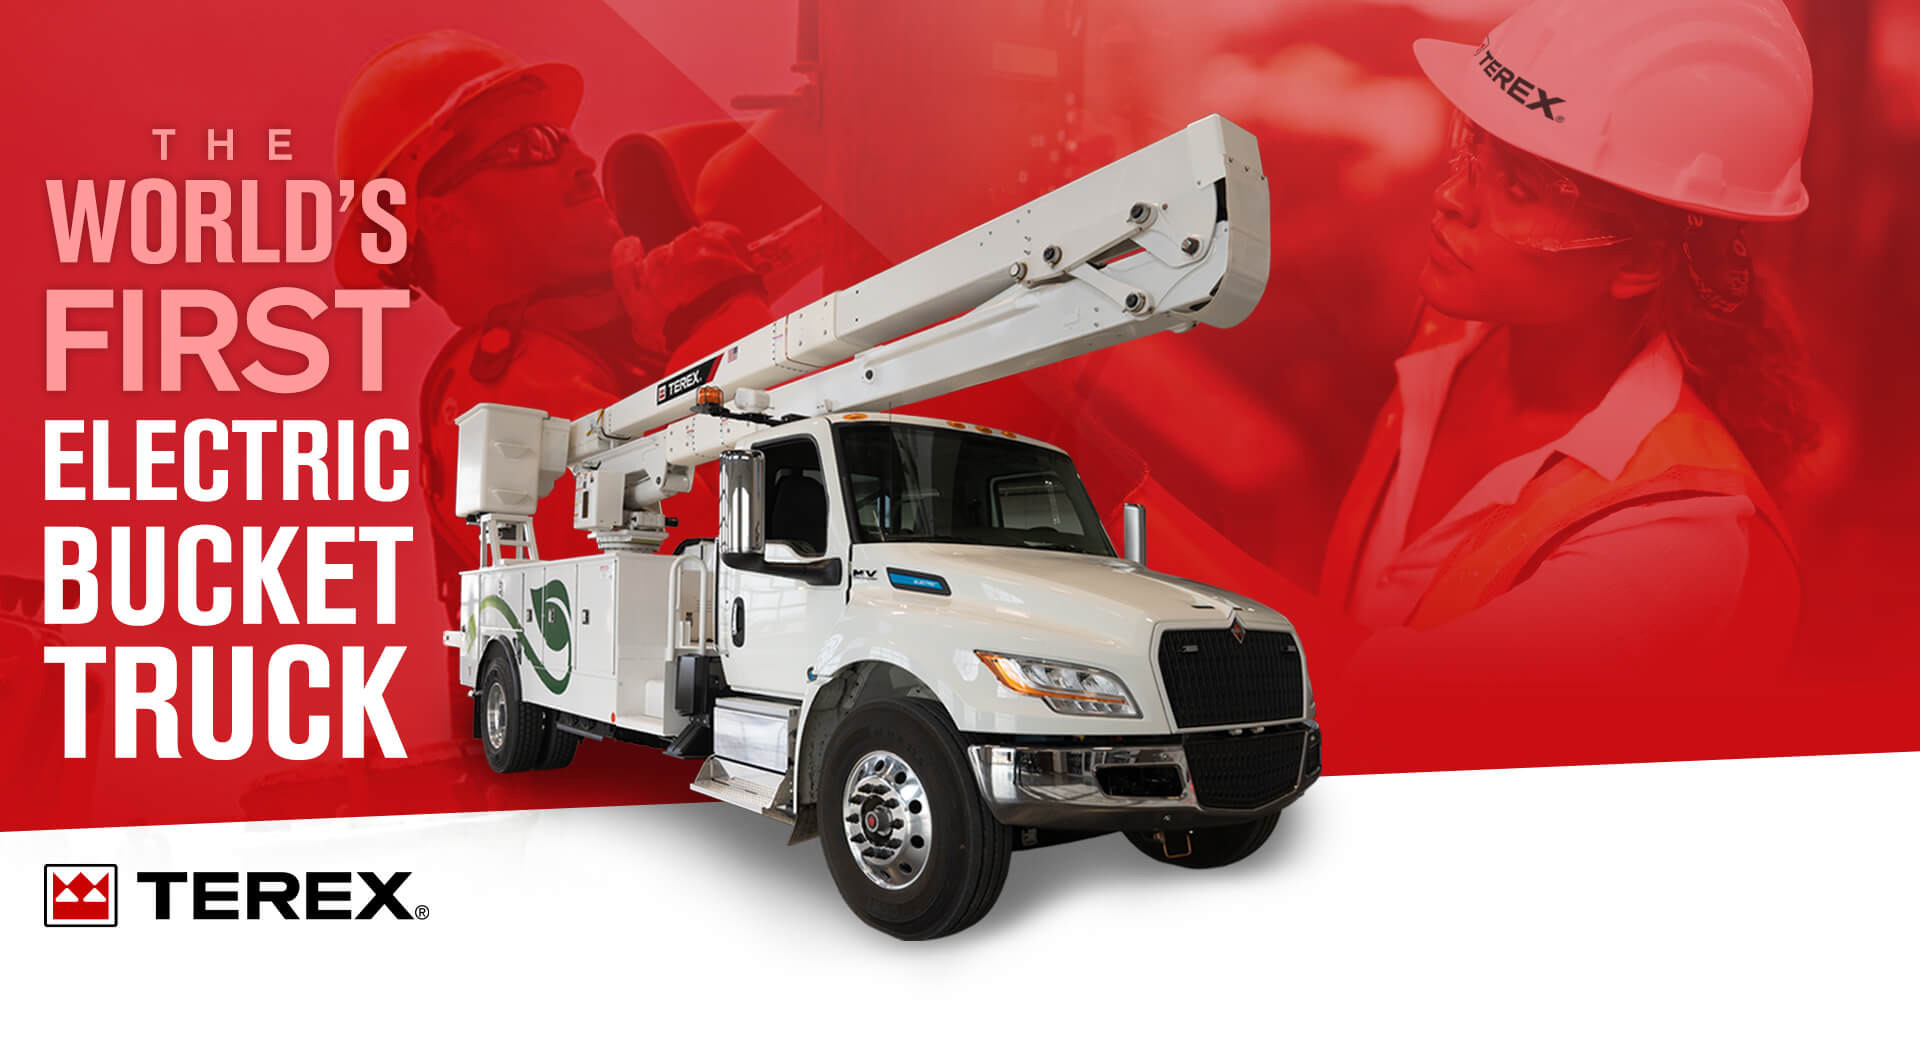 The First All-Electric Bucket Truck | The Terex EV